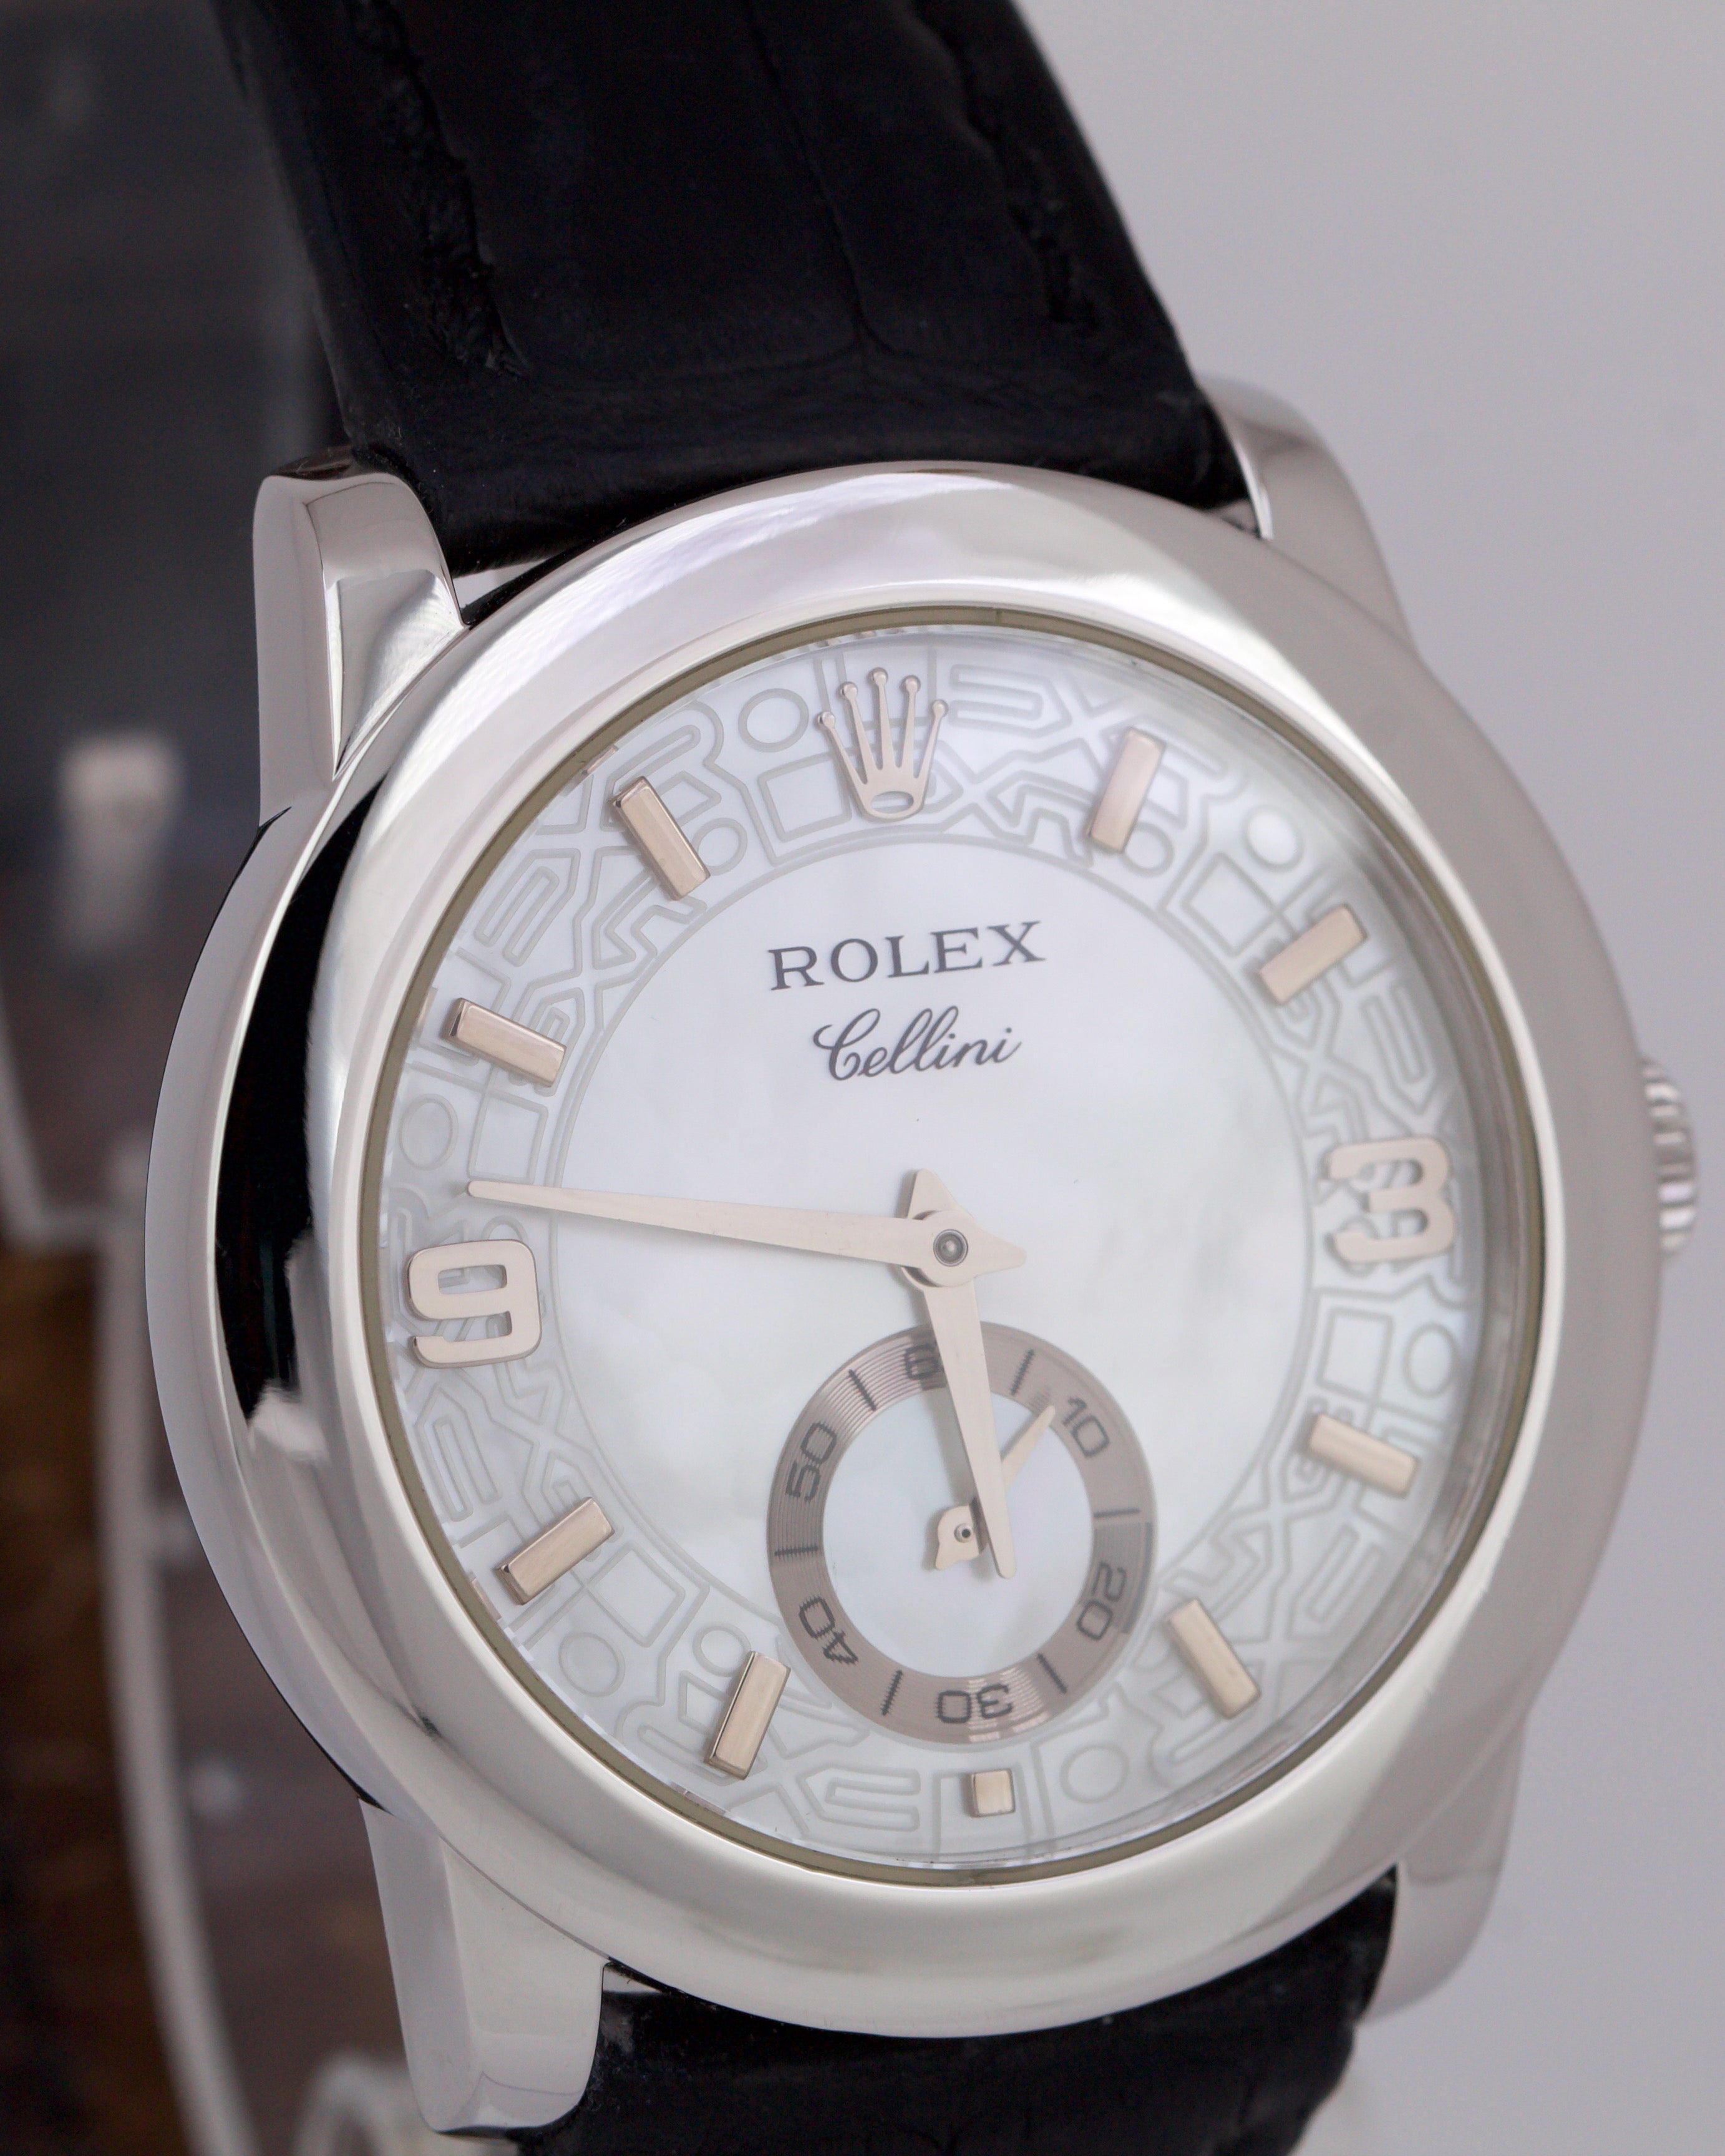 RSC Rolex Cellini Cellinium JUBILEE MOTHER OF PEARL Platinum 35mm 5240/6 Watch